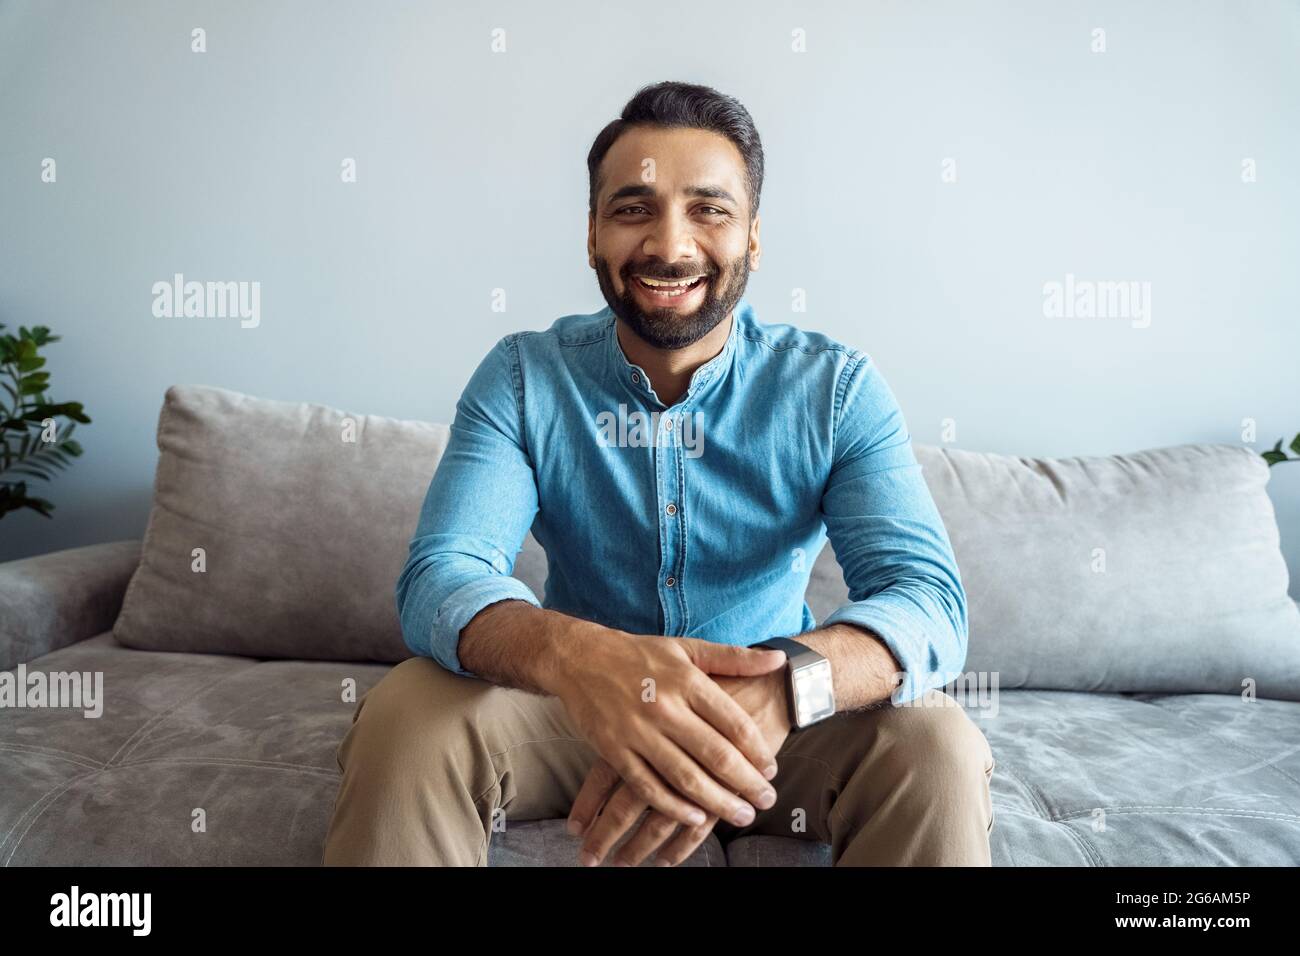 Portrait of indian man toothy smiling to camera sitting on sofa webcam view Stock Photo